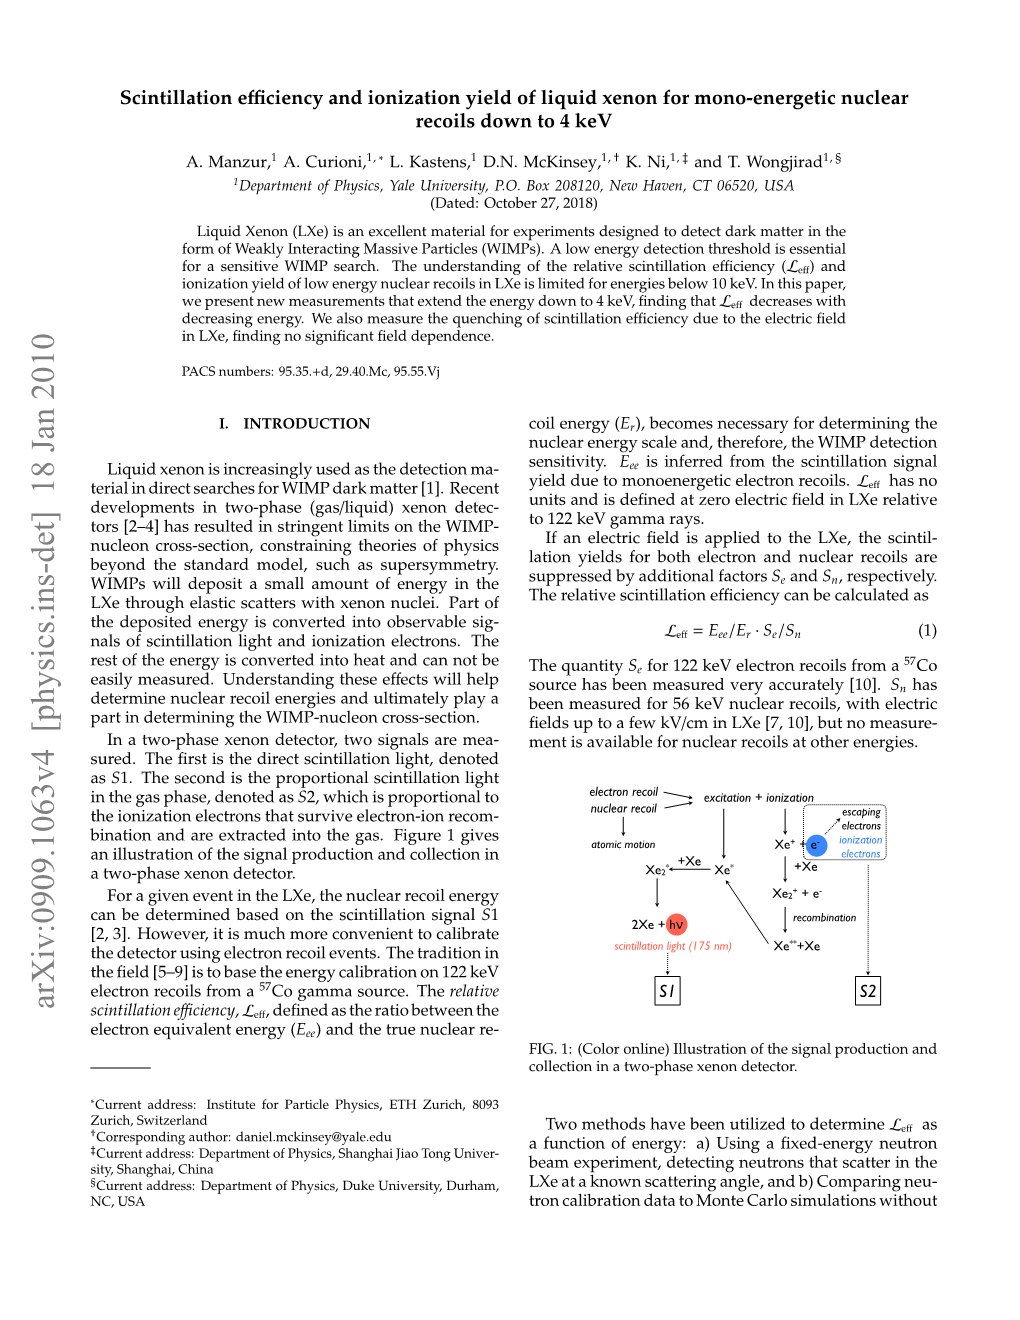 Scintillation Efficiency and Ionization Yield of Liquid Xenon for Mono